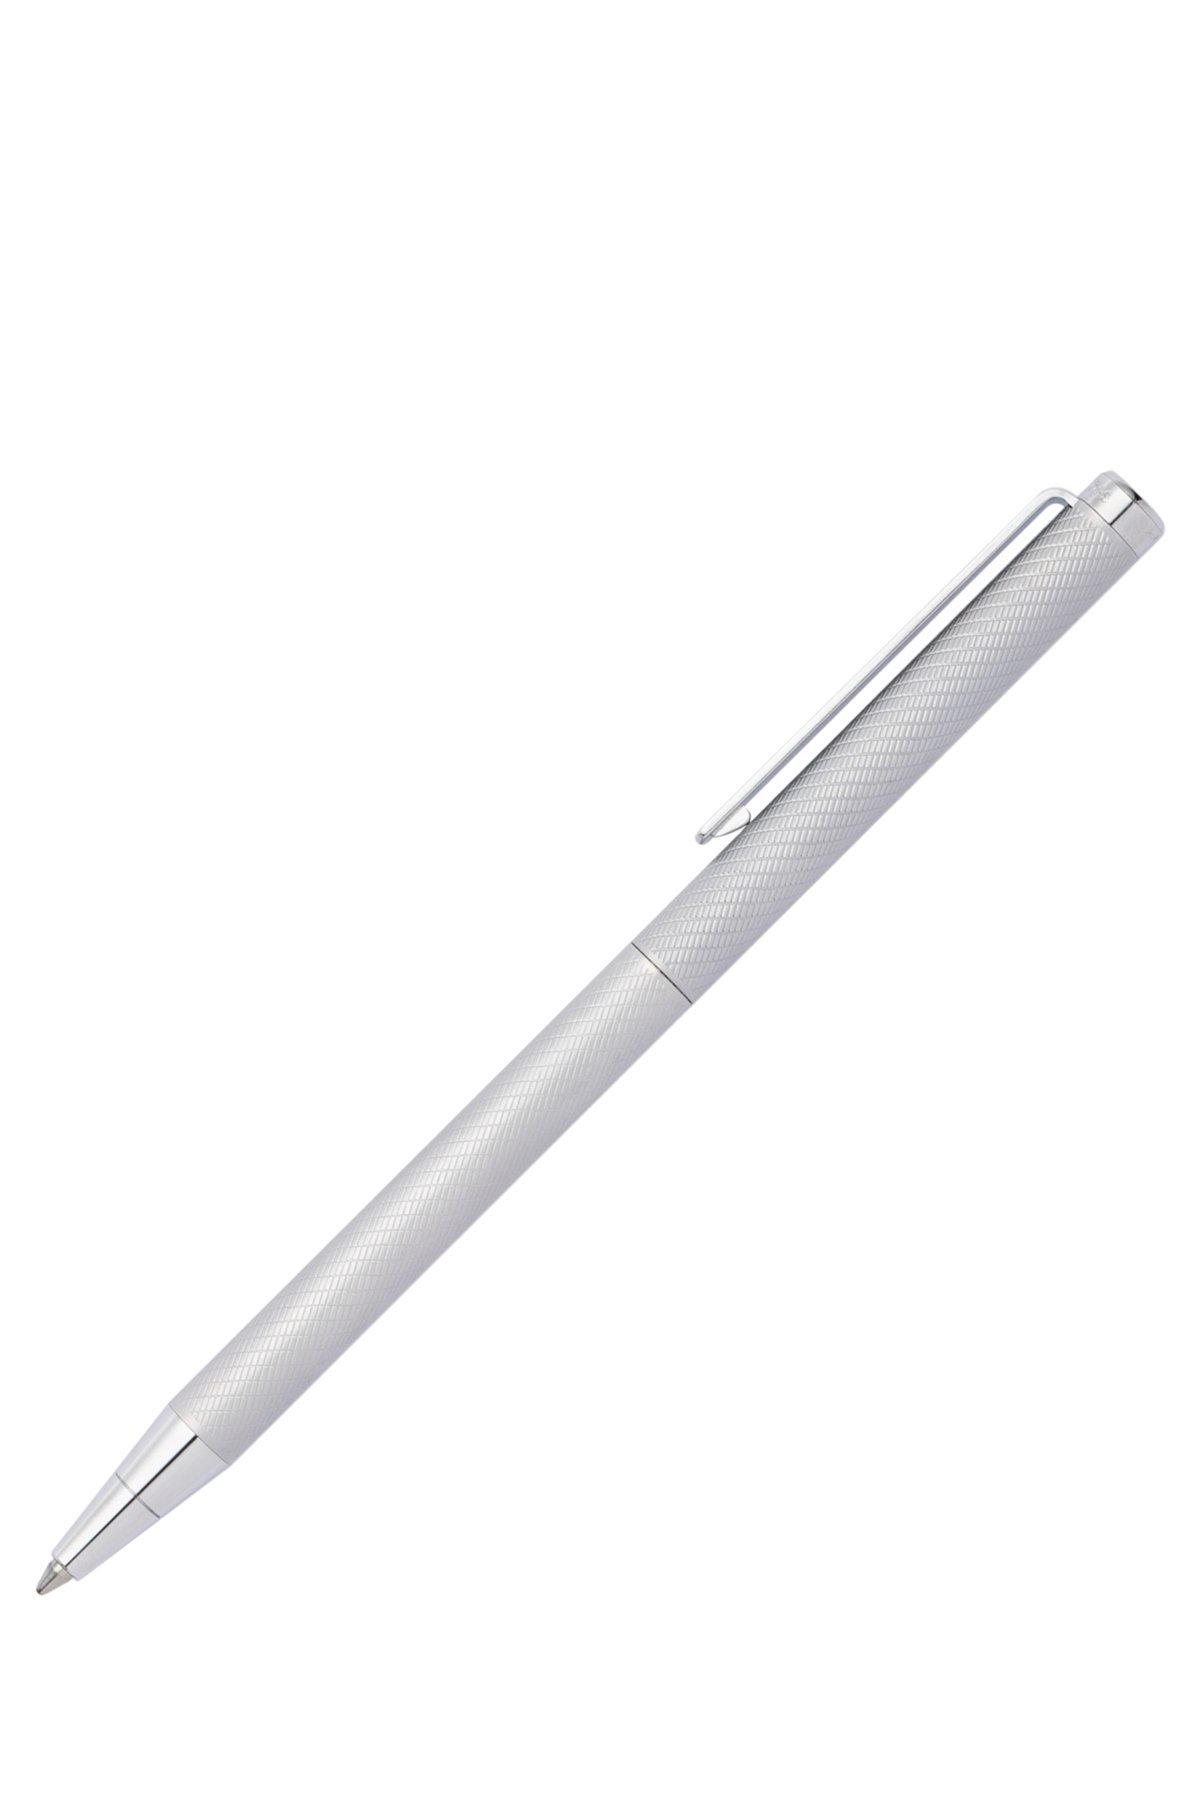 Chrome ballpoint pen with engraved pattern, Silver